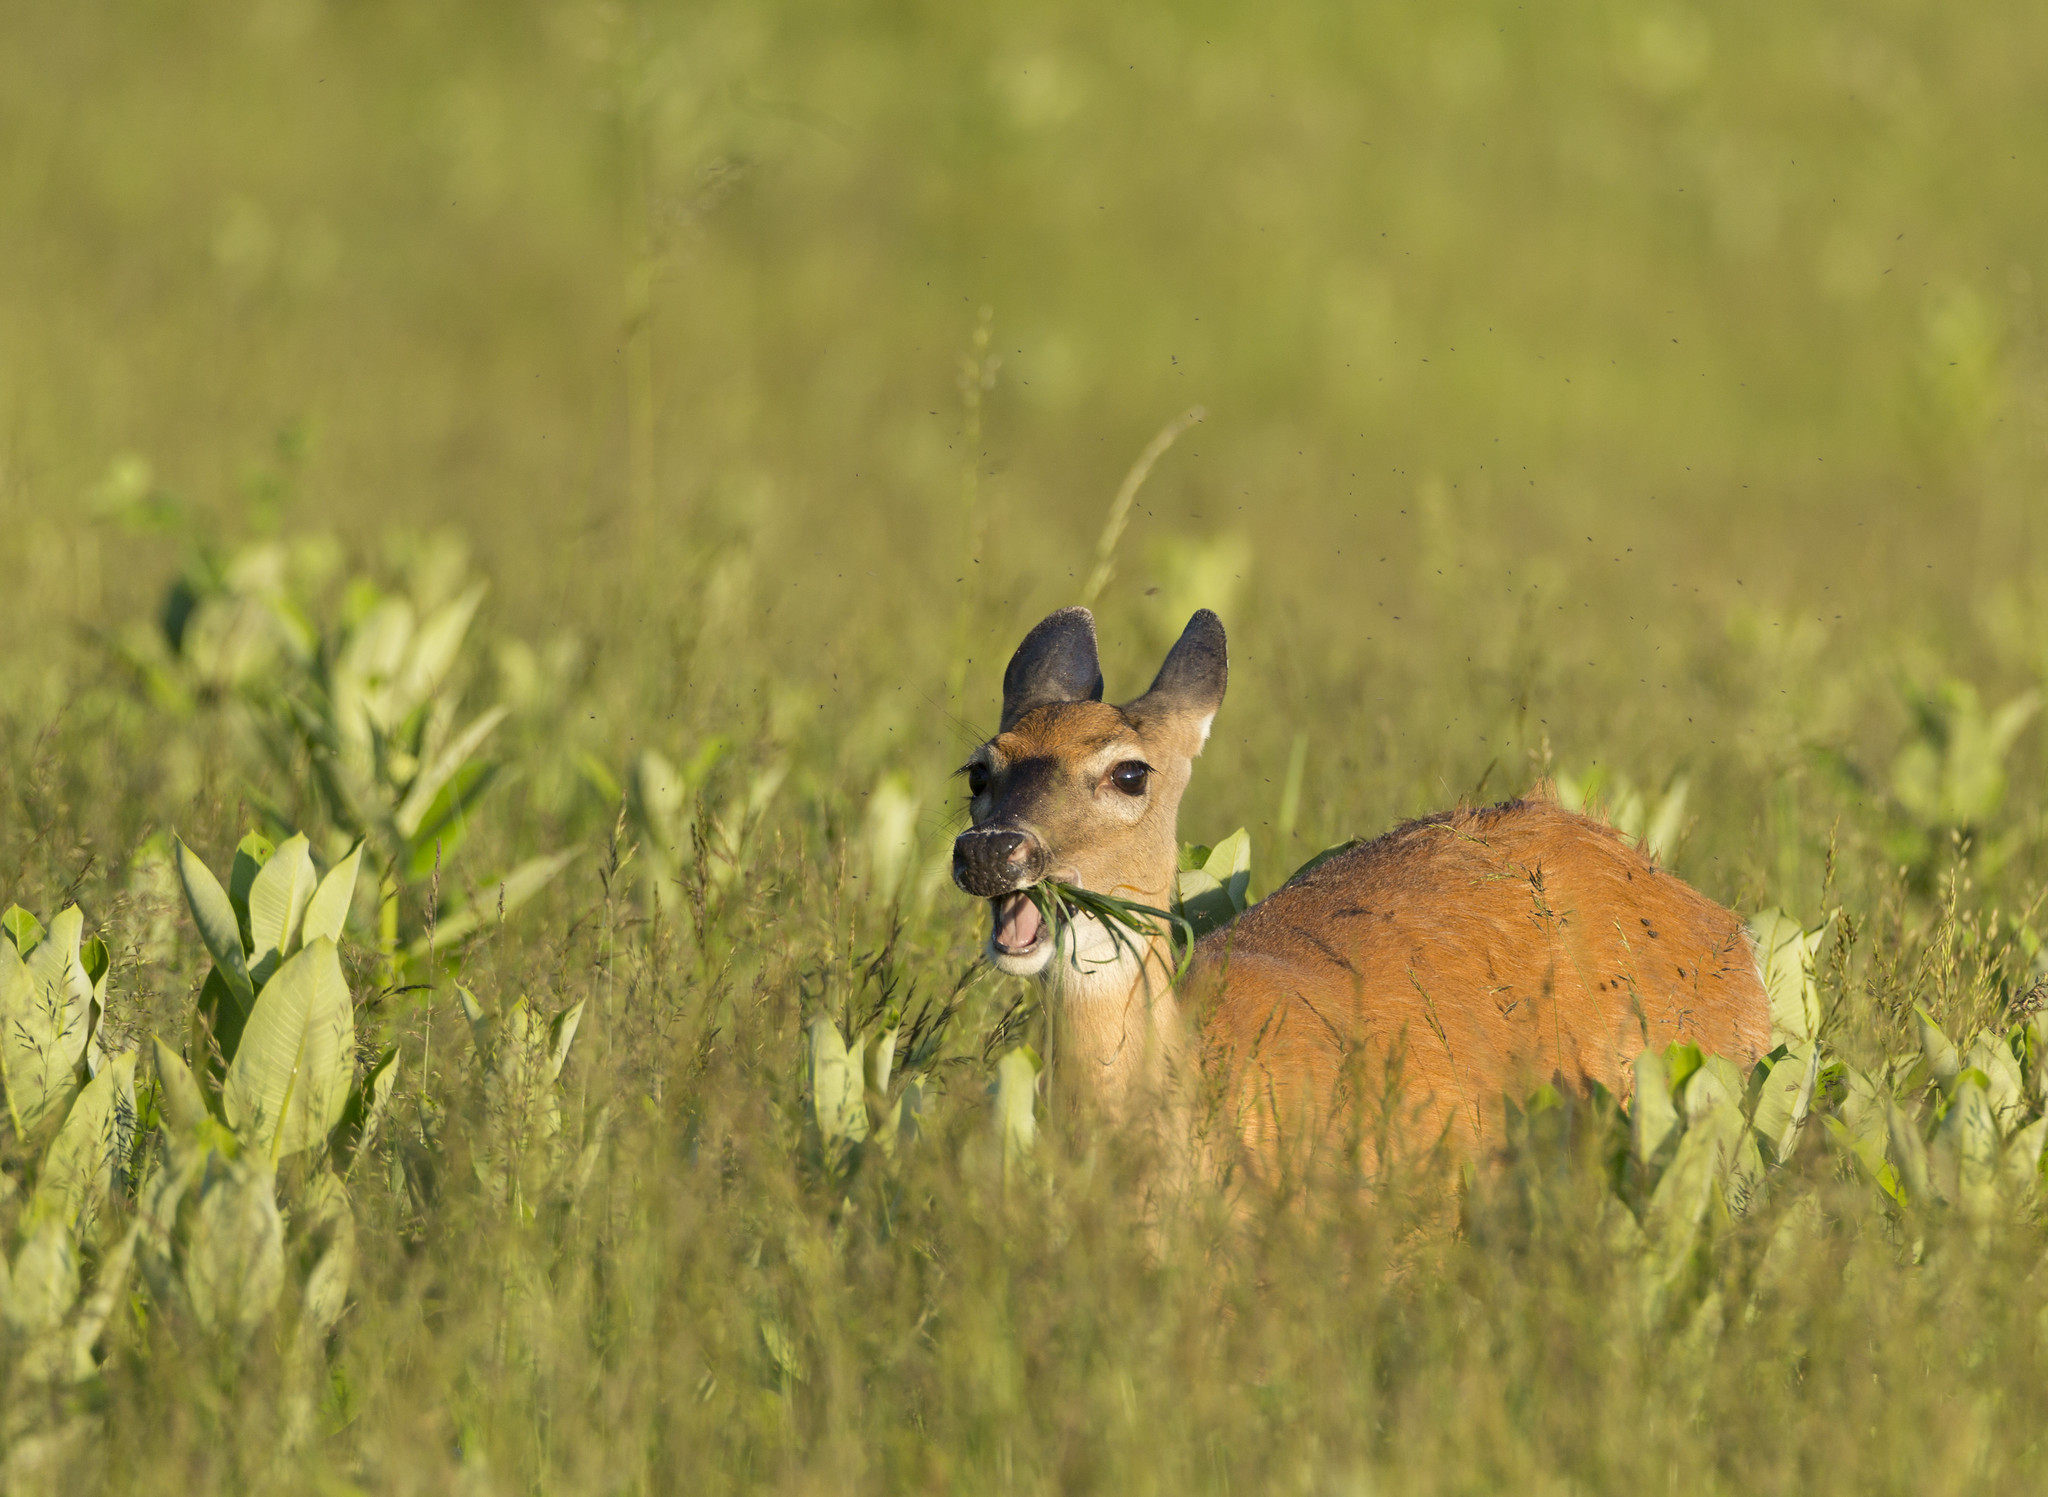 A whitetail deer eats grass in Tennessee.